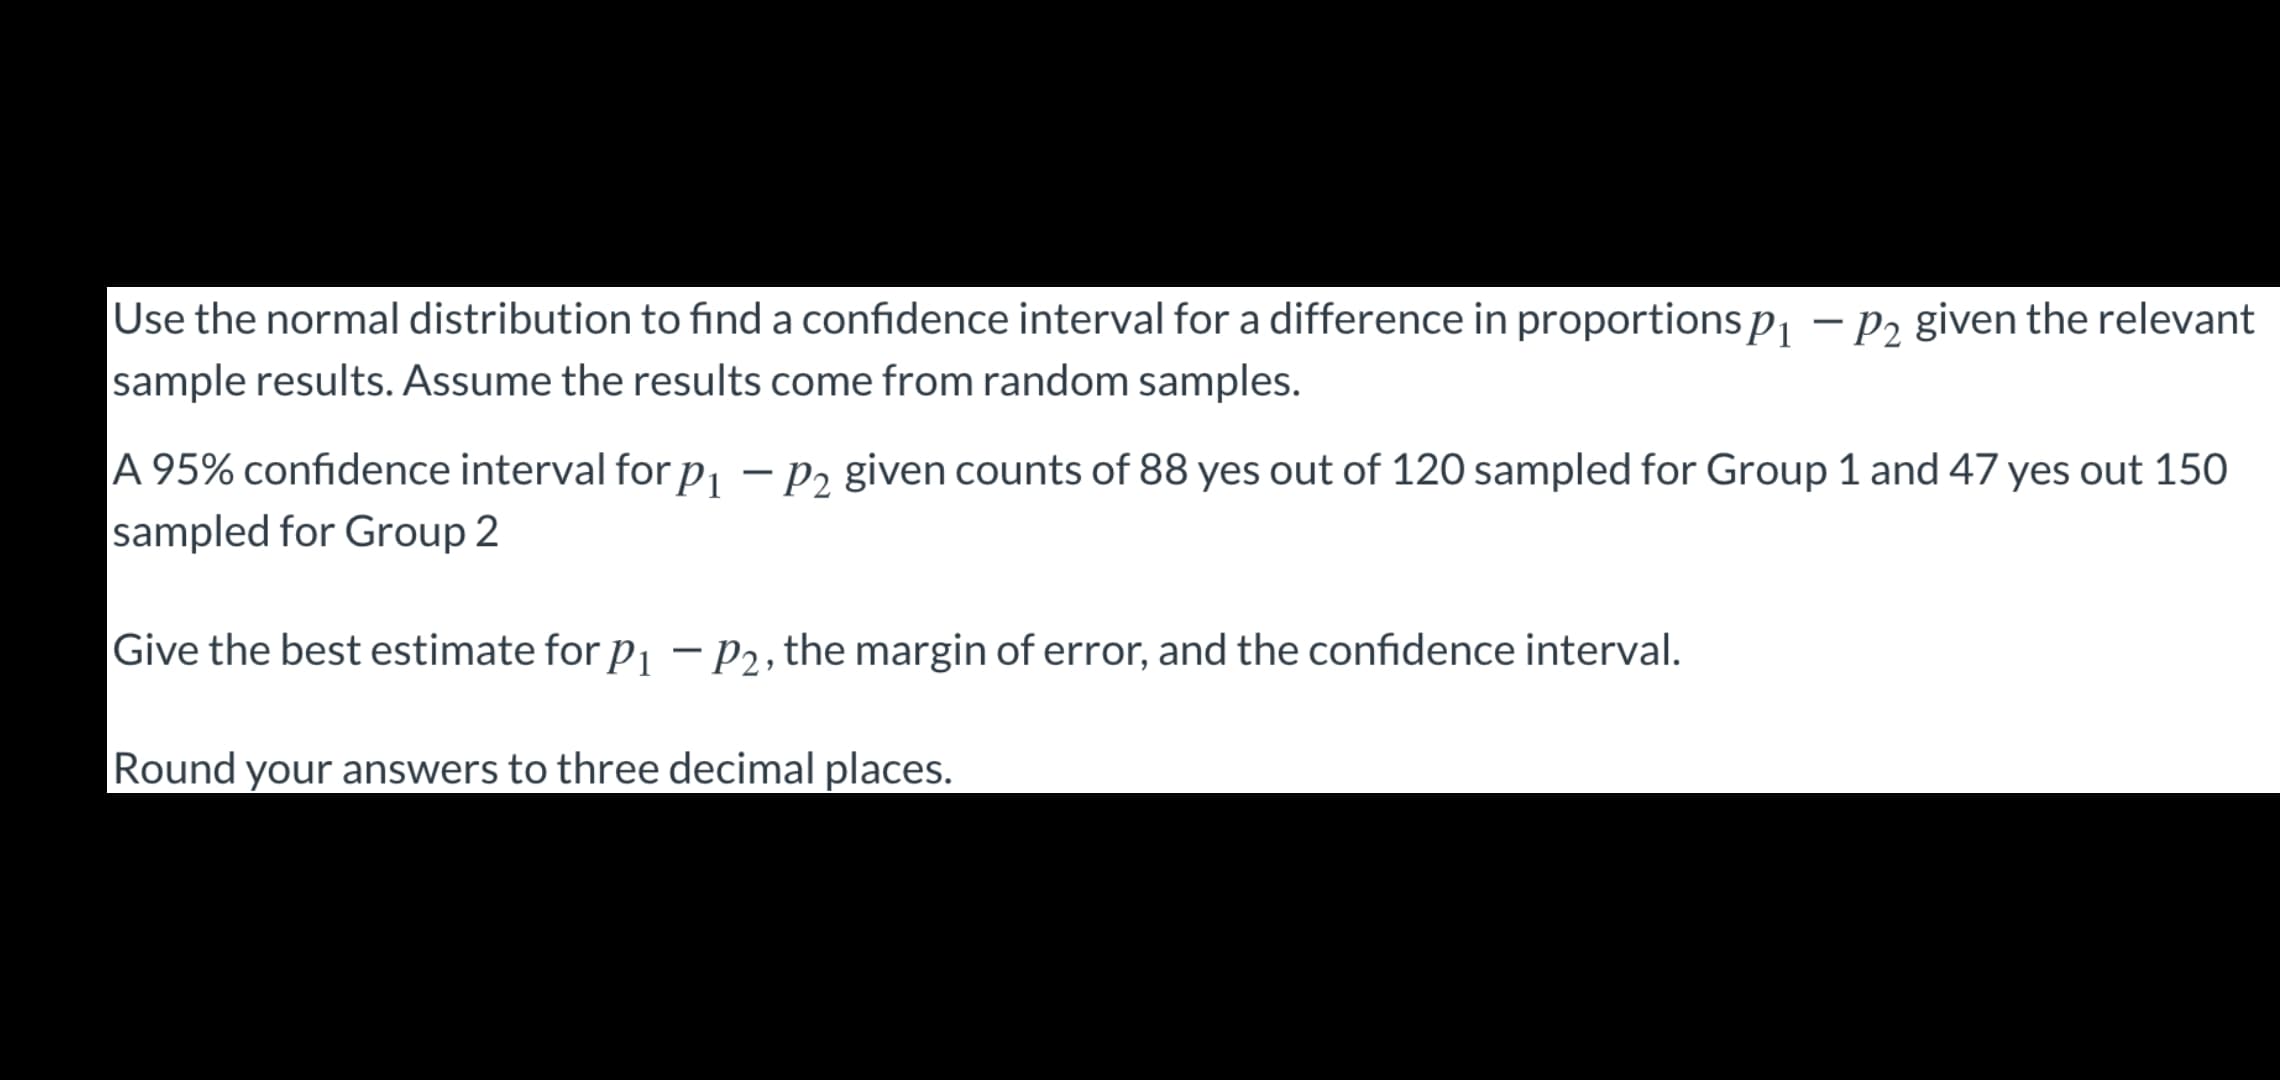 Use the normal distribution to find a confidence interval for a difference in proportions p¡ – P2 given the relevant
sample results. Assume the results come from random samples.
A 95% confidence interval for p, – pɔ given counts of 88 yes out of 120 sampled for Group 1 and 47 yes out 150
sampled for Group 2
Give the best estimate for p, - P2, the margin of error, and the confidence interval.
Round your answers to three decimal places.
